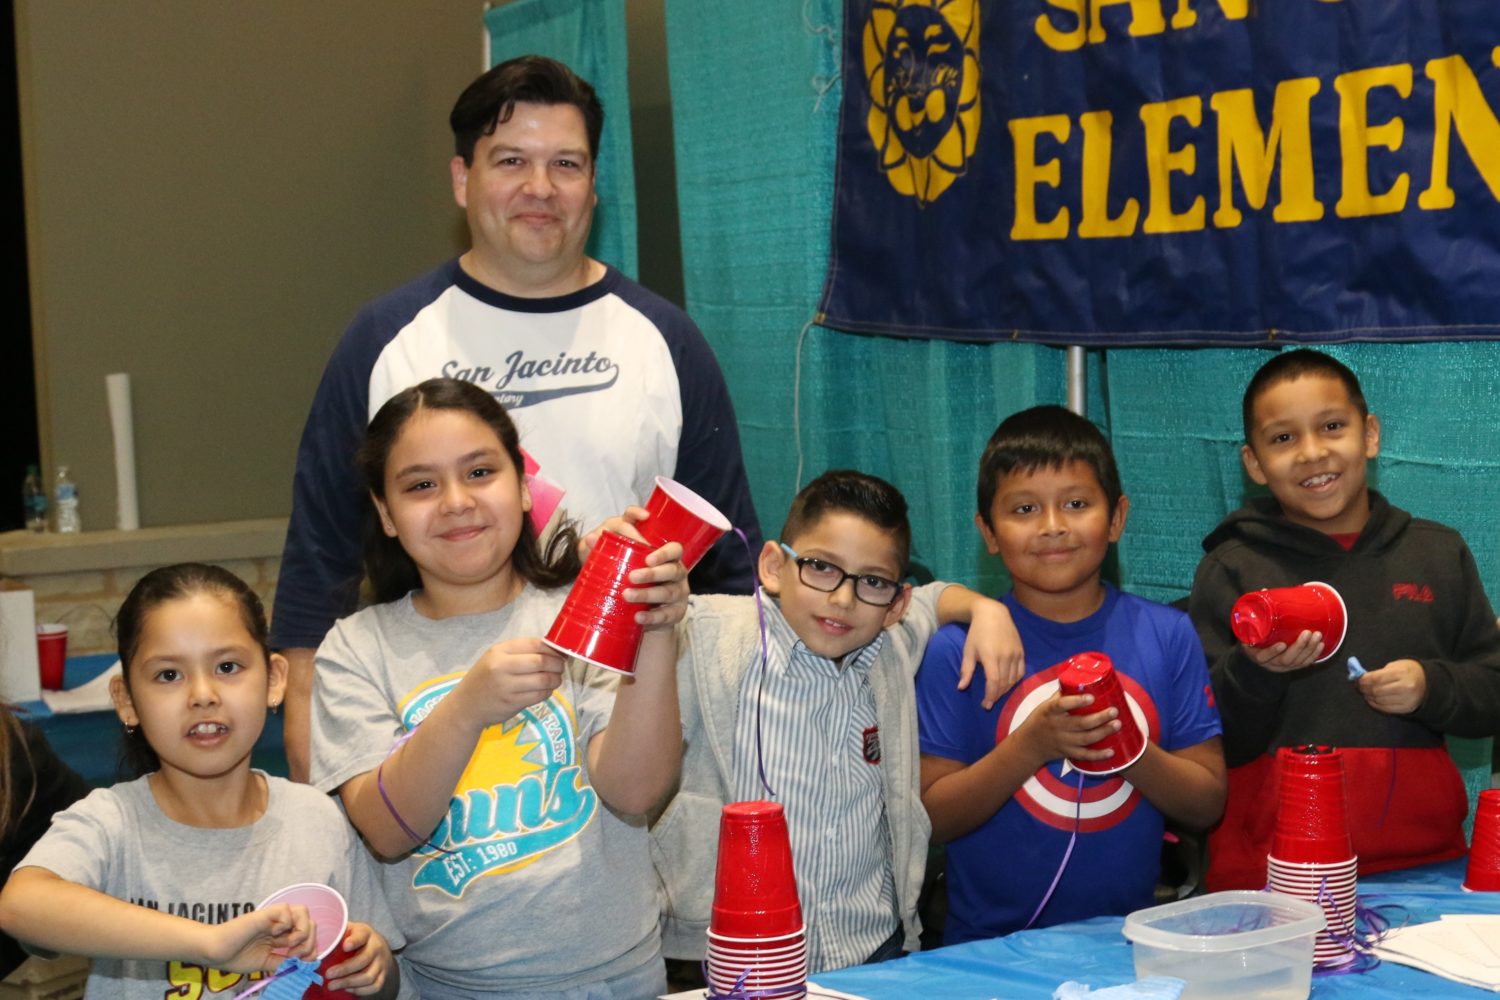 students pose for a picture at a science fair